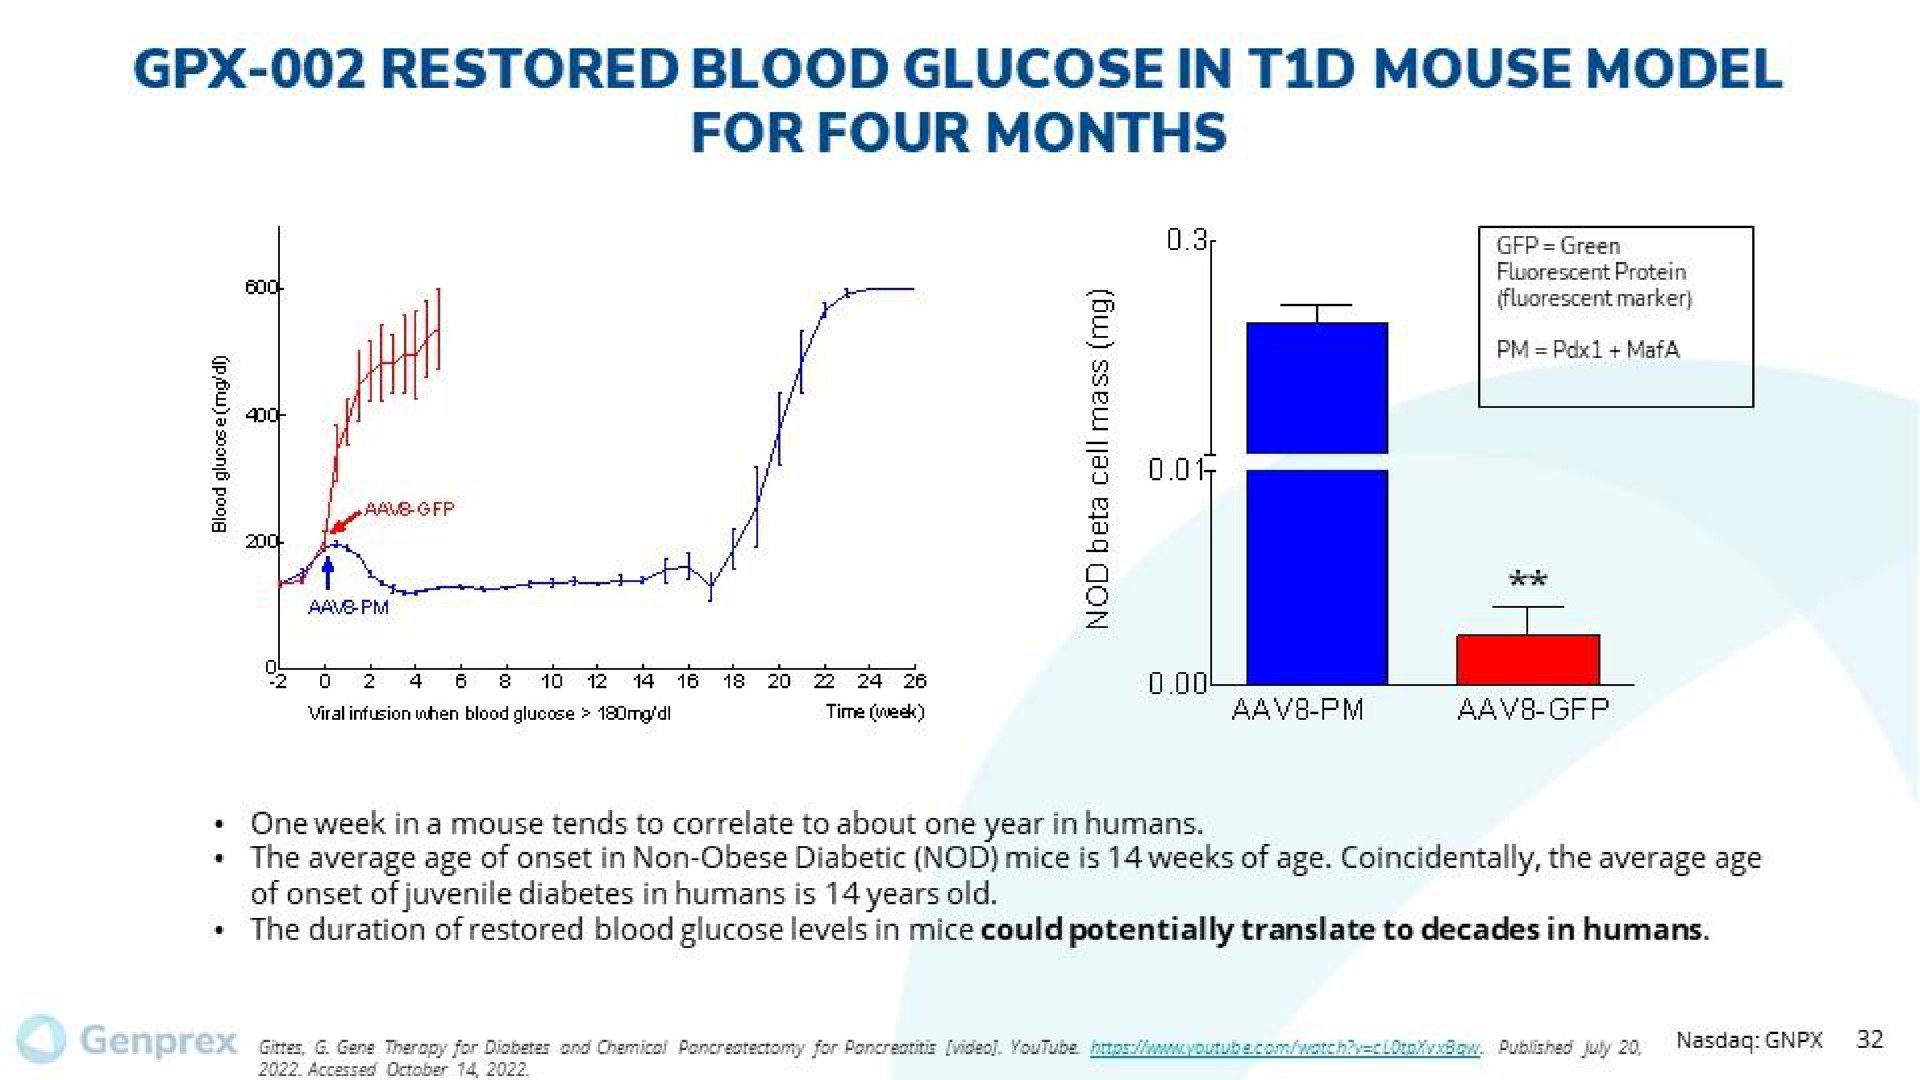 restored blood glucose in mouse model for four months | Genprex